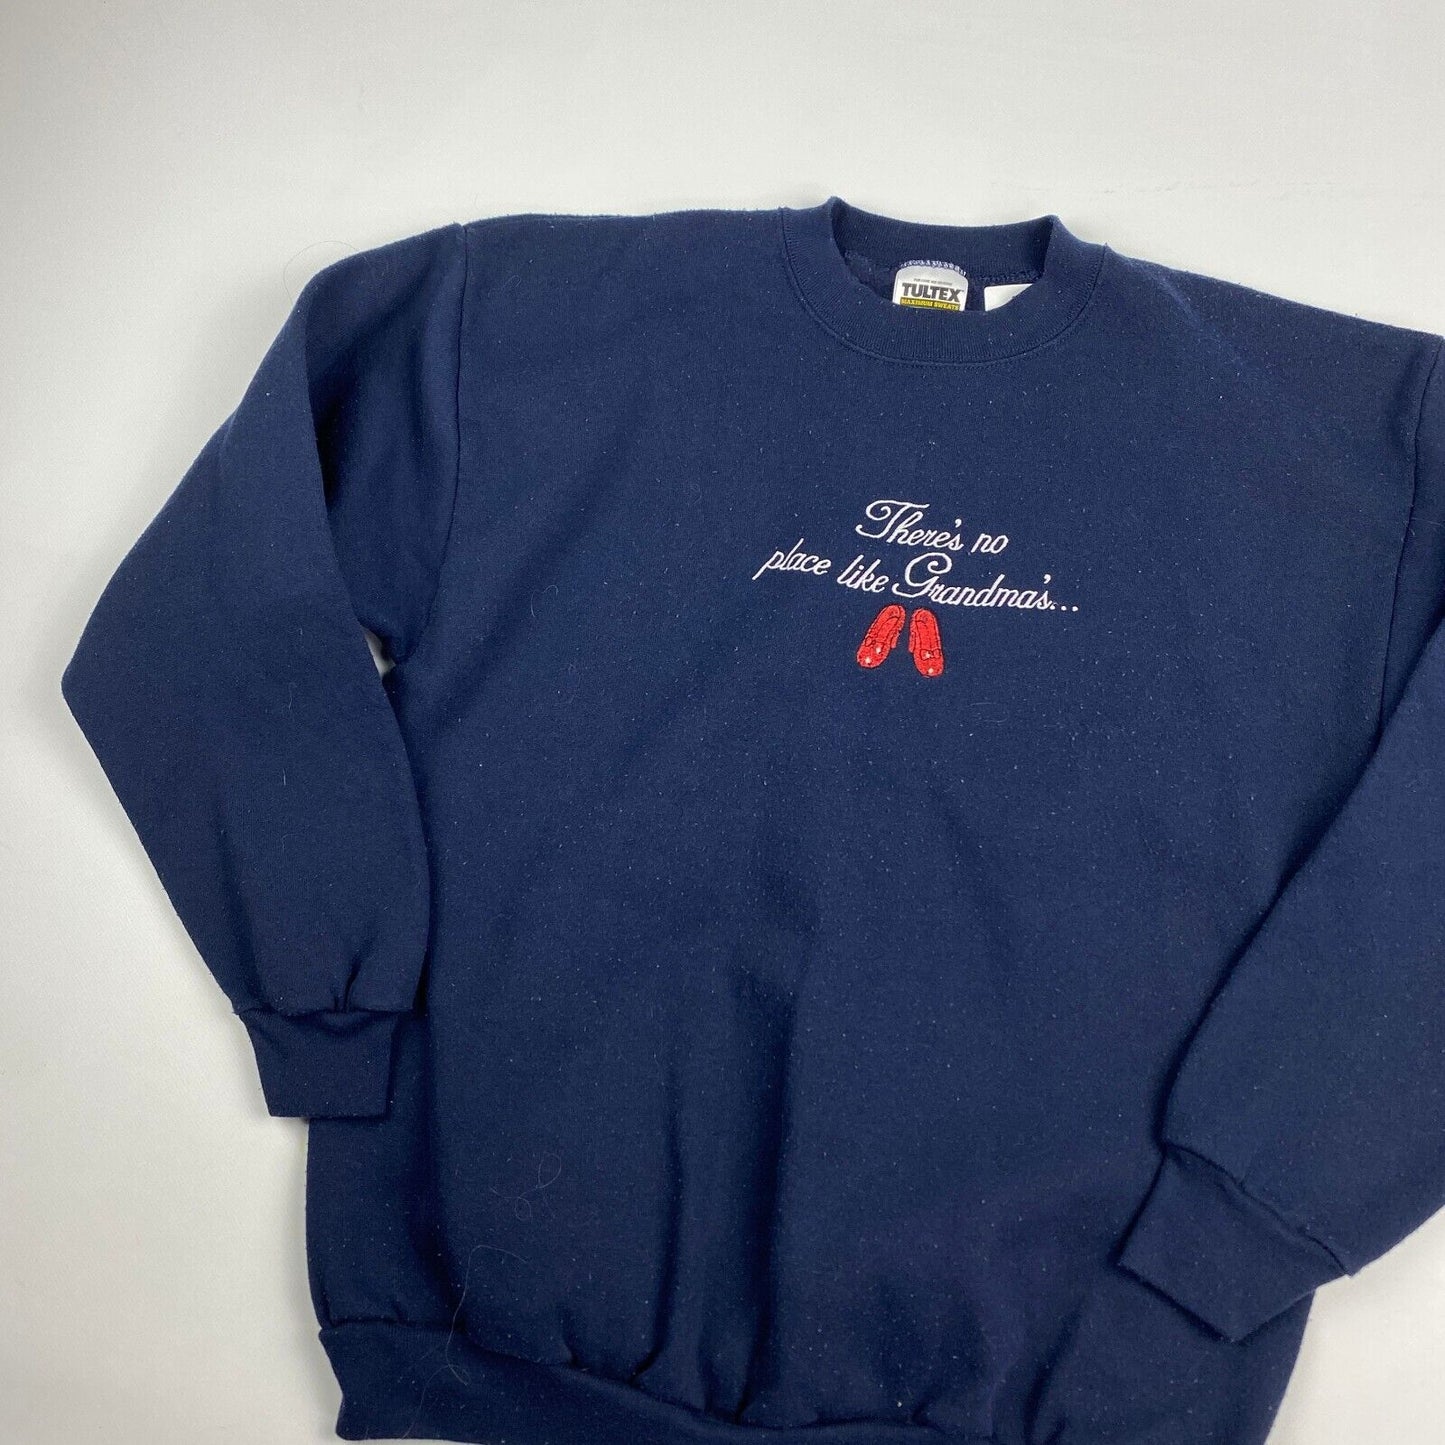 VINTAGE 90s Theres No Place Like Grandmas Embroidered Crewneck Sweater sz L Men